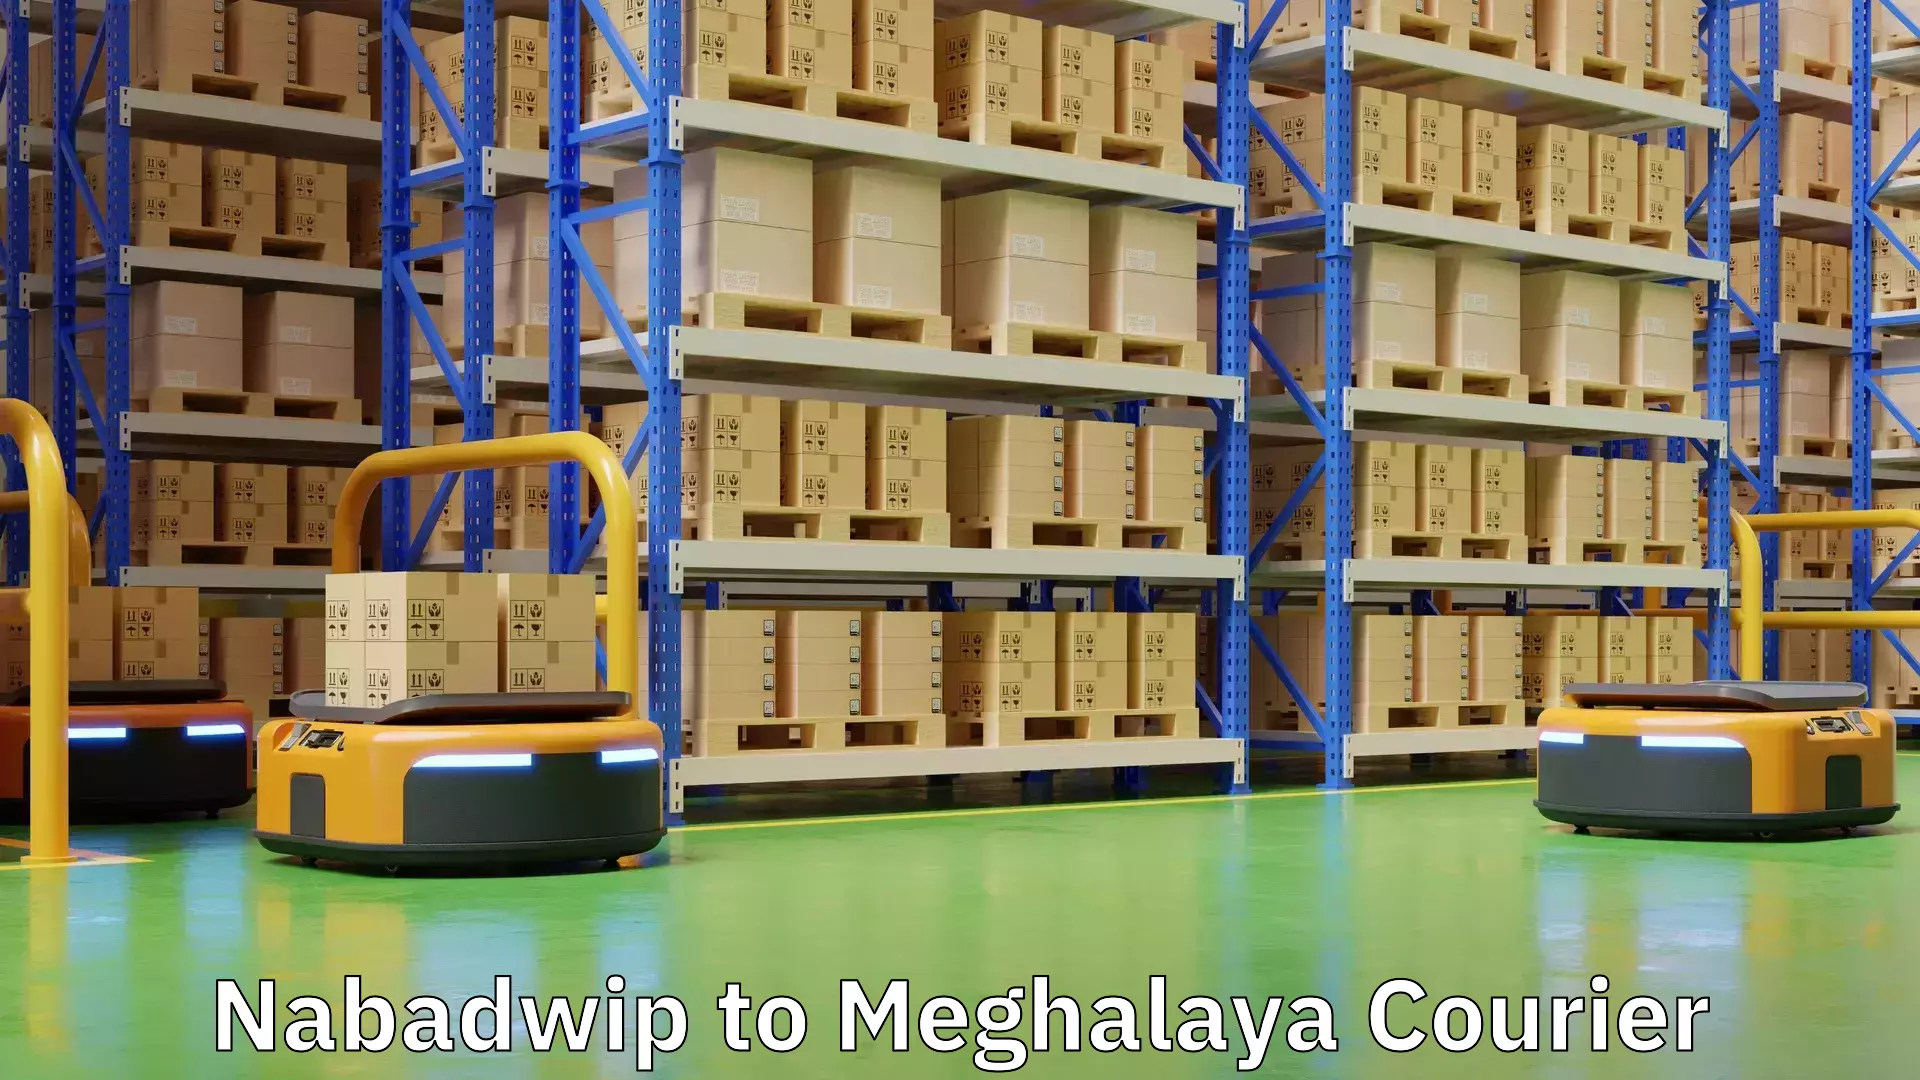 High-priority parcel service in Nabadwip to Meghalaya